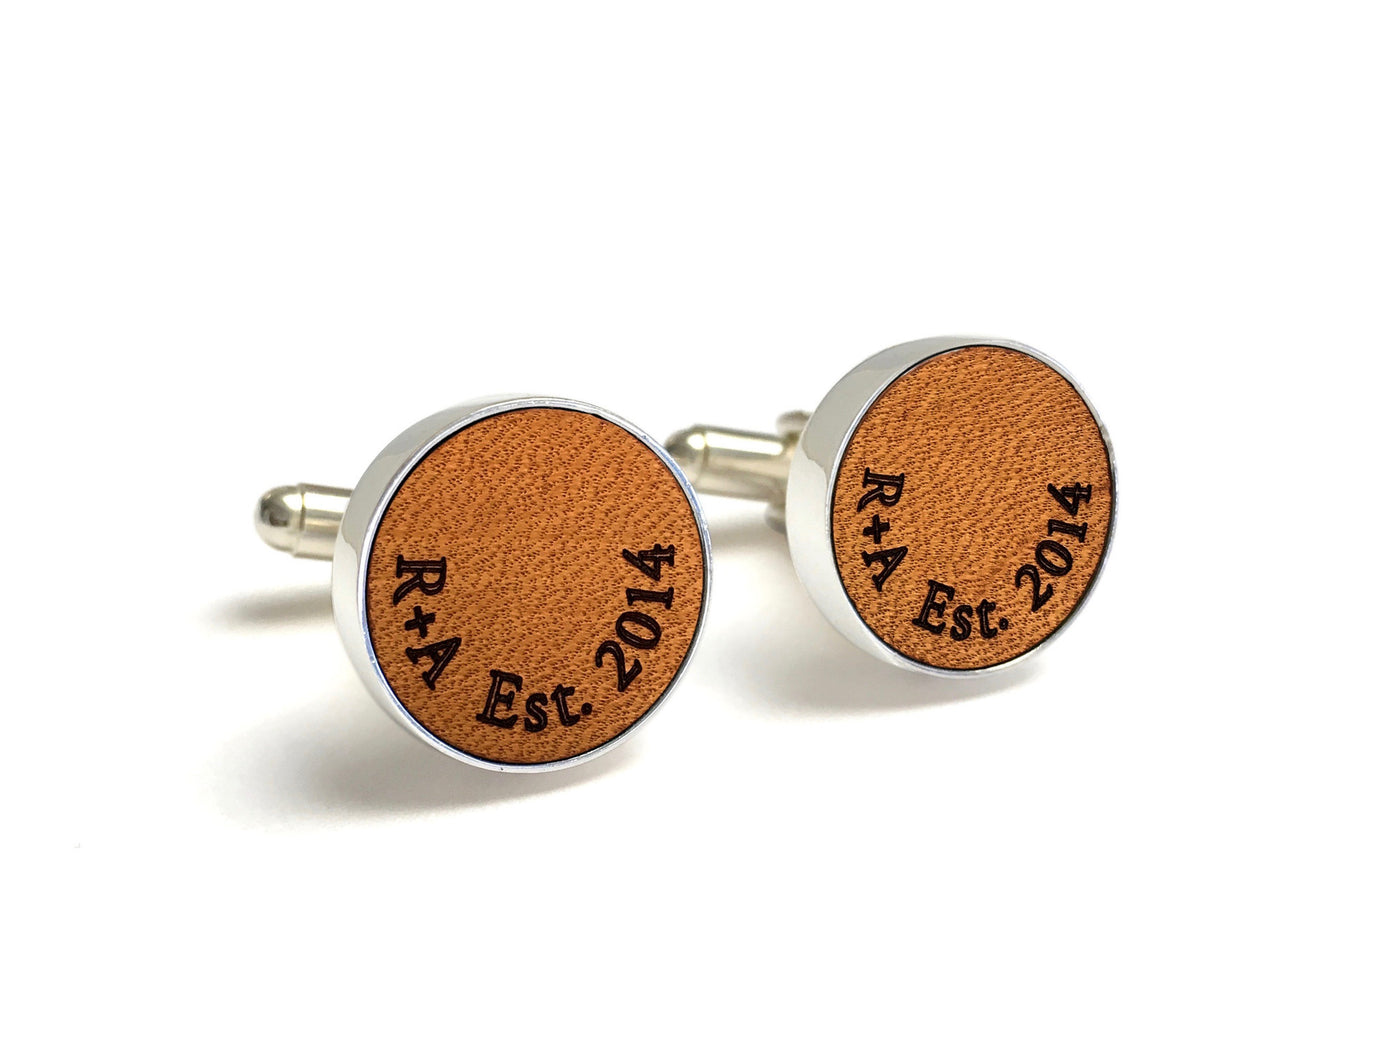 3 Year Anniversary Gifts For Him - Personalized Leather Cufflinks